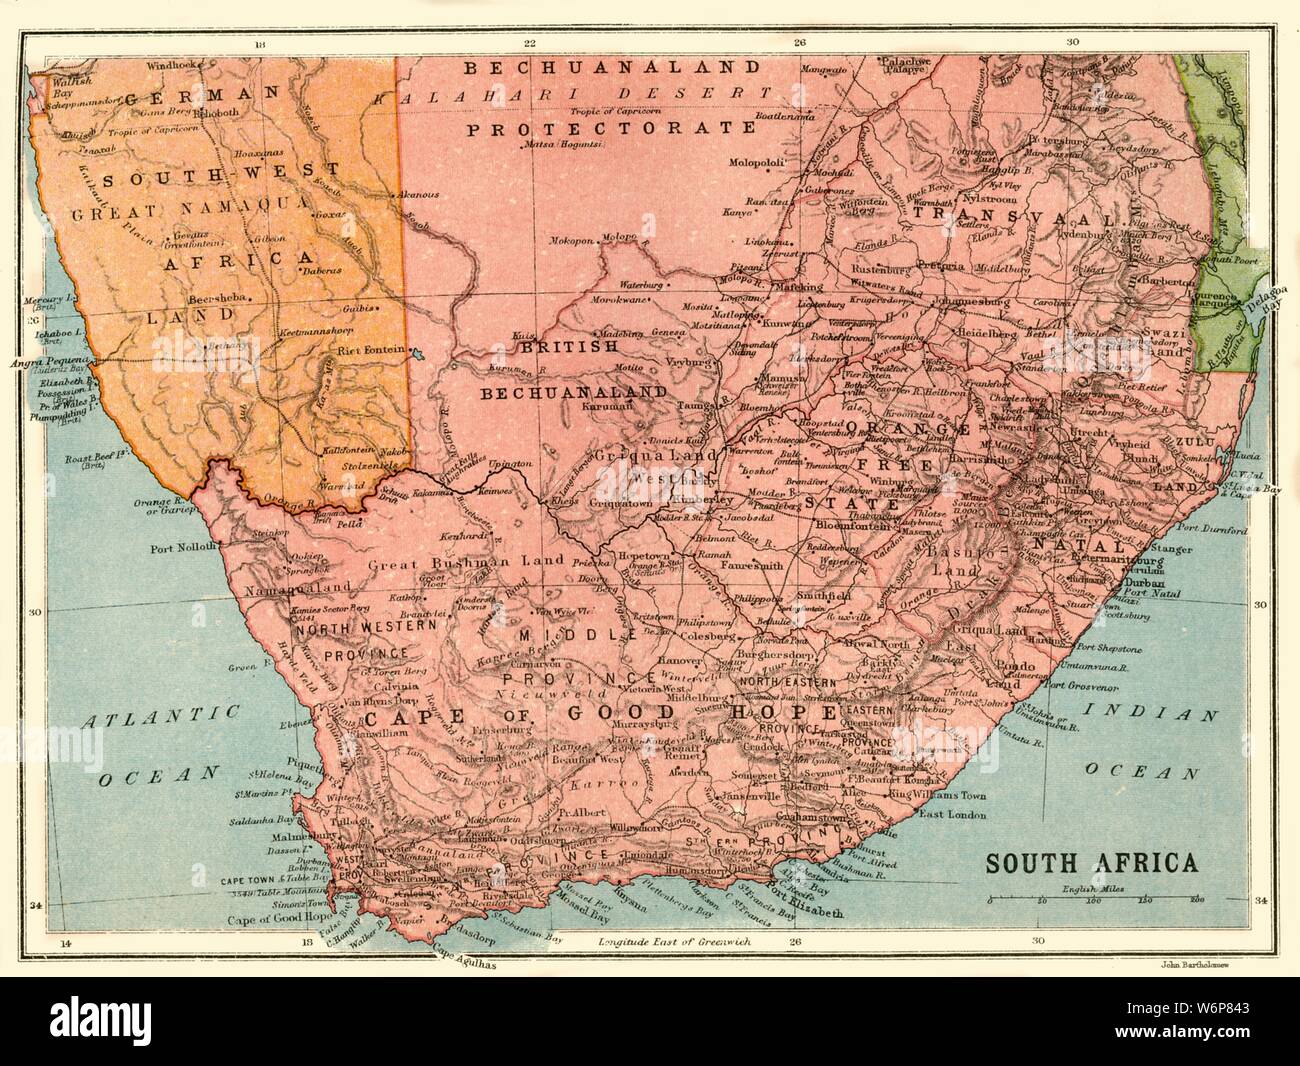 Map of South Africa, c1914, (c1920). Map of the southern tip of Africa at the start of the First World War, showing German South-West Africa (later Namibia), and various provinces of South Africa including the Bechuanaland Protectorate, Transvaal, Natal, Orange Free State, and Zululand. From &quot;The Great World War - A History&quot; Volume I, edited by Frank A Mumby. [The Gresham Publishing Company Ltd, London, c1920] Stock Photo